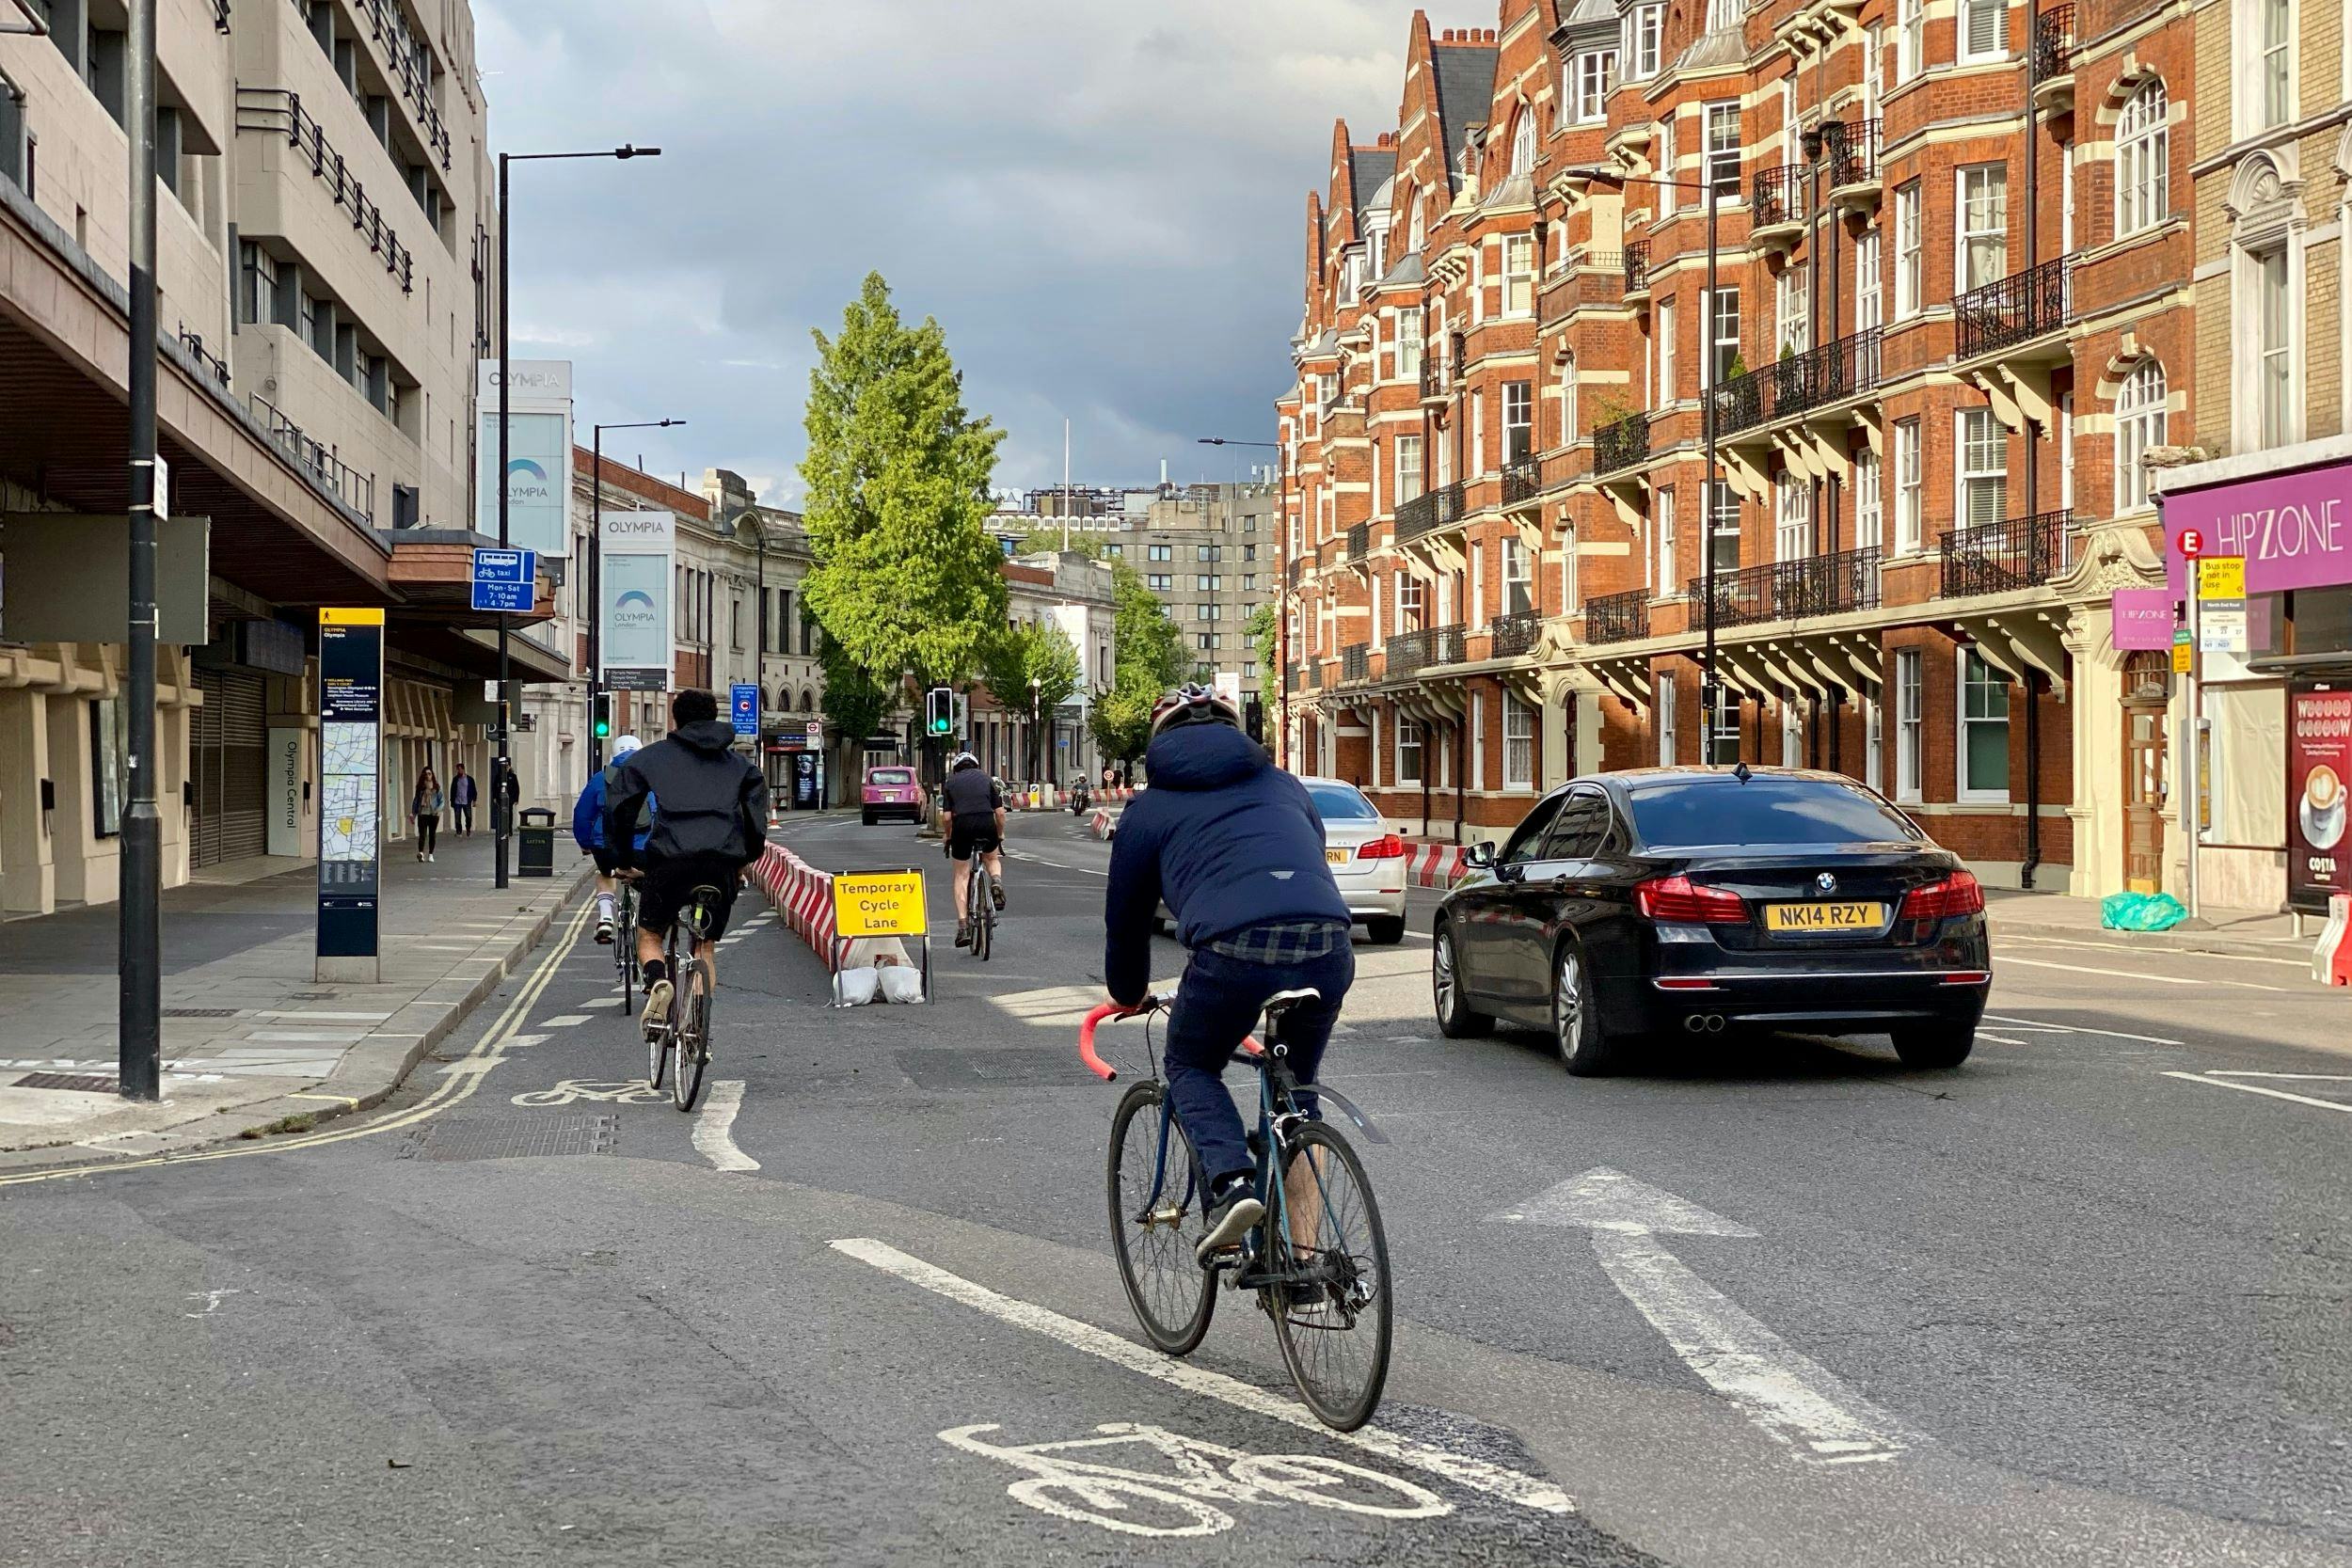 Temporary cycle lanes in cities such as London have boosted the popularity of cycling in the UK during the pandemic. - Photo Shutterstock 